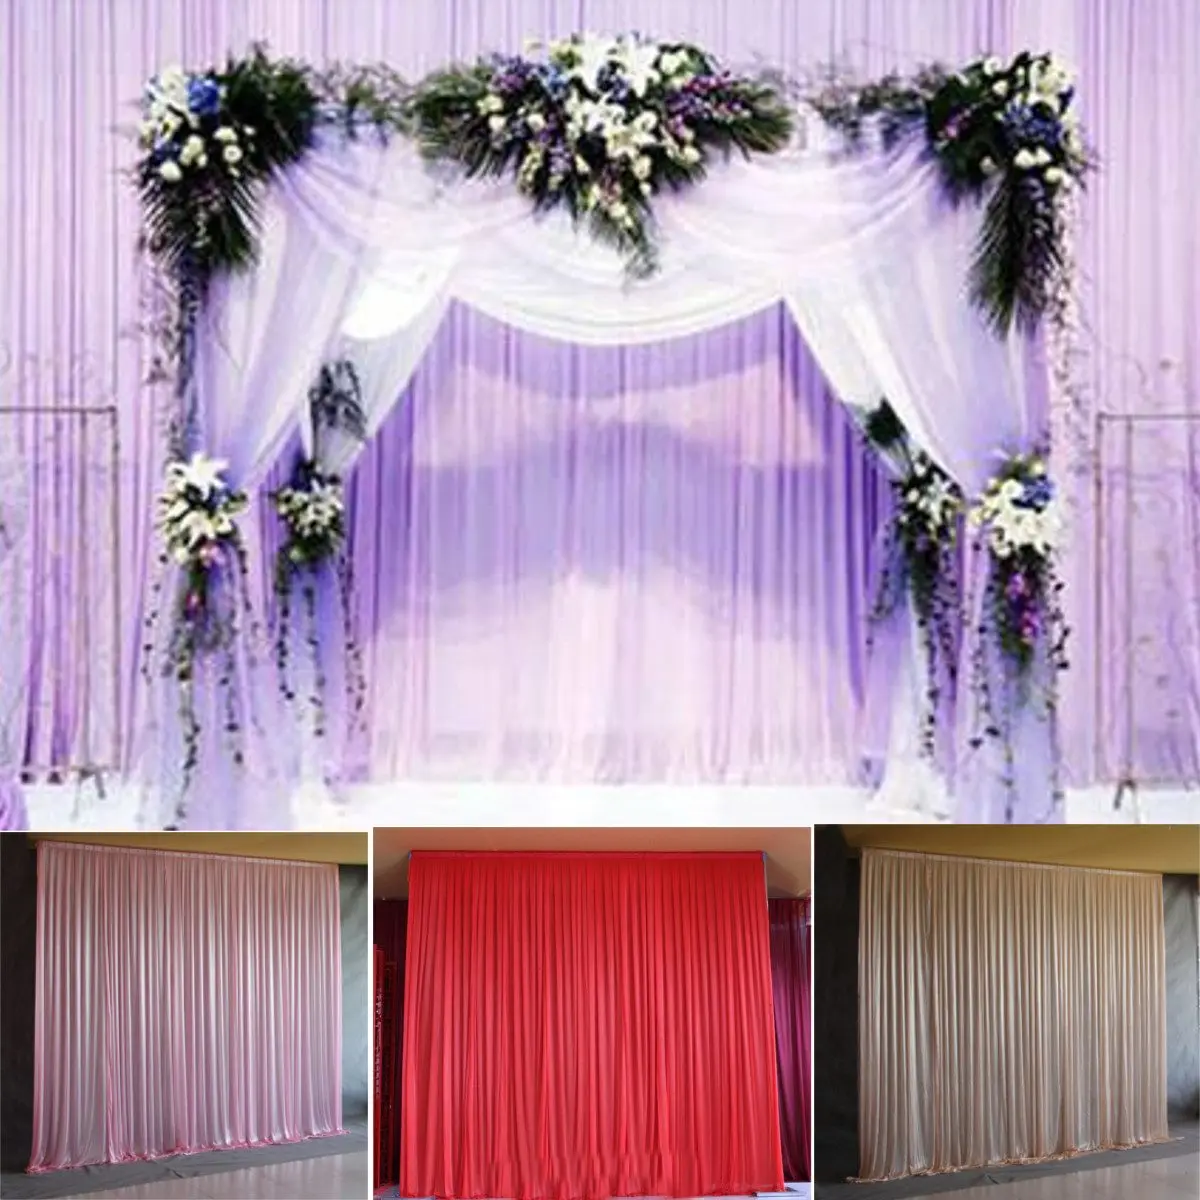 

2.4X1.5m Sheer Silk Drapes Panels Hanging Curtains Party Backdrop 5 Colors Wedding Decoration Drape Big Events Background Cloth